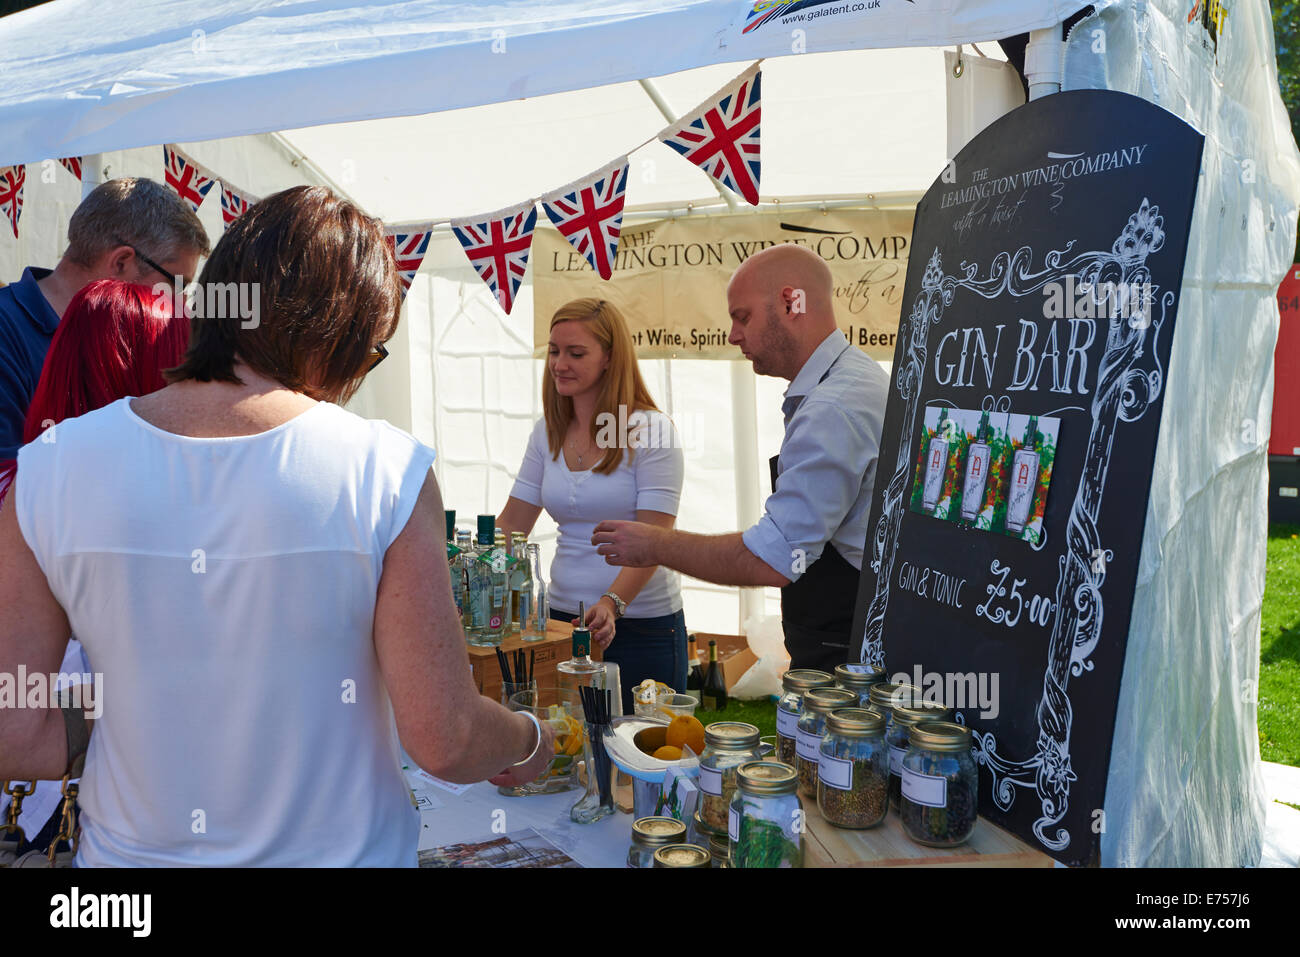 Gin Bar Run By The Leamington Wine Company At The Food And Drink Festival Leamington Spa Warwickshire UK Stock Photo